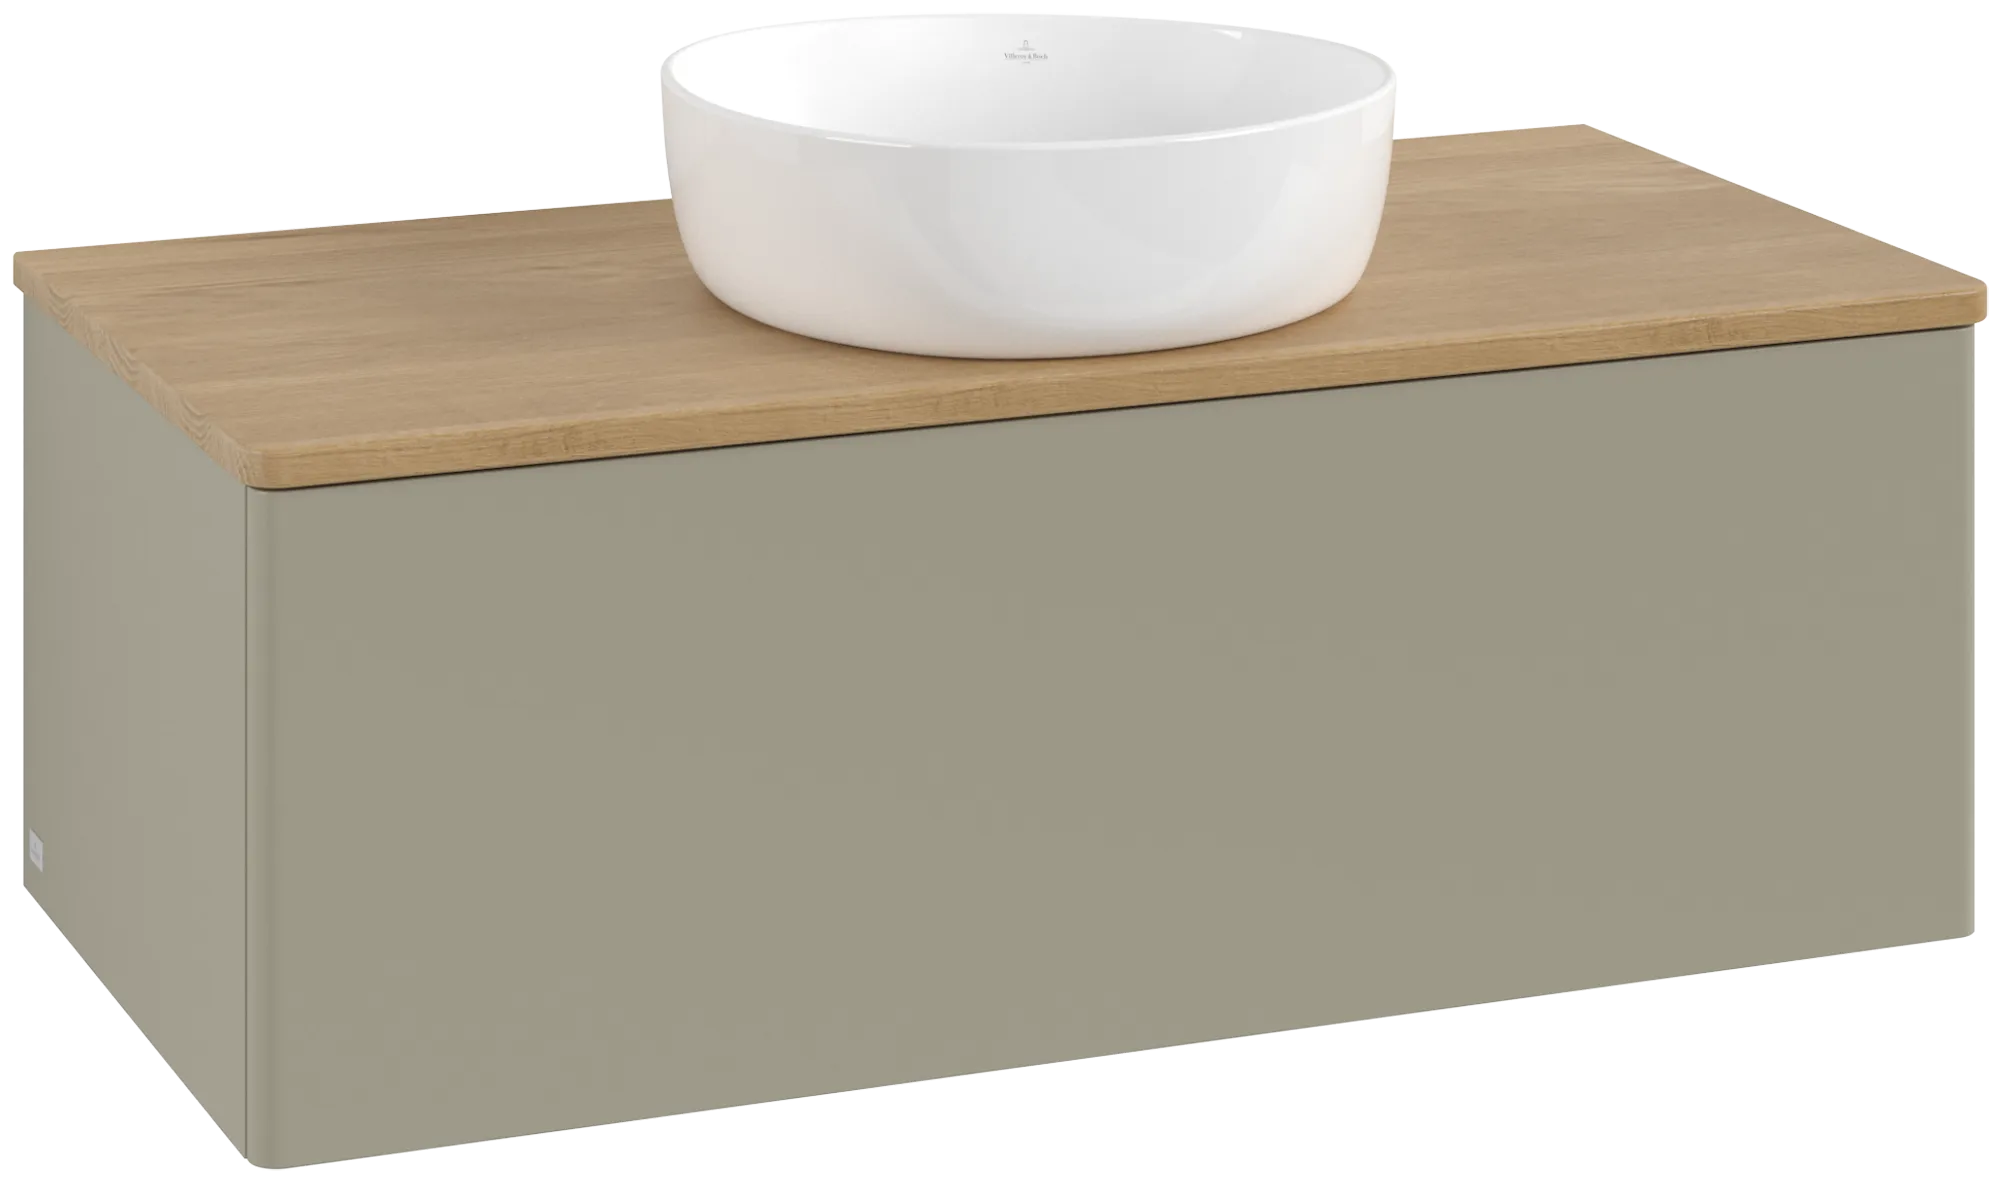 Obrázek VILLEROY BOCH Antao Vanity unit, 1 pull-out compartment, 1000 x 360 x 500 mm, Front without structure, Stone Grey Matt Lacquer / Honey Oak #K31011HK